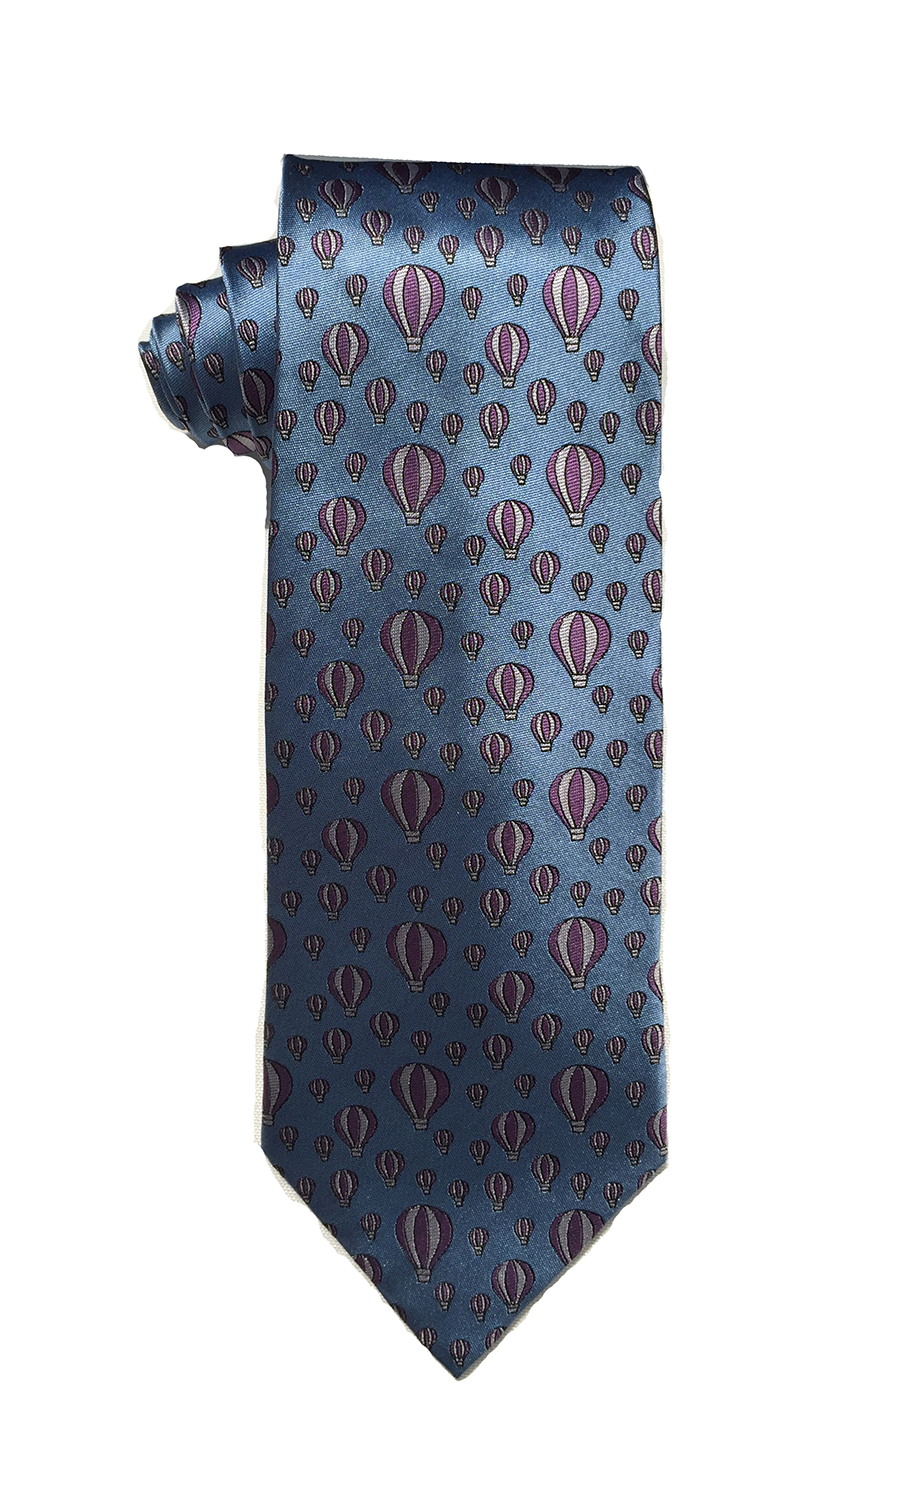 Hot air balloon tie in light blue and lavender